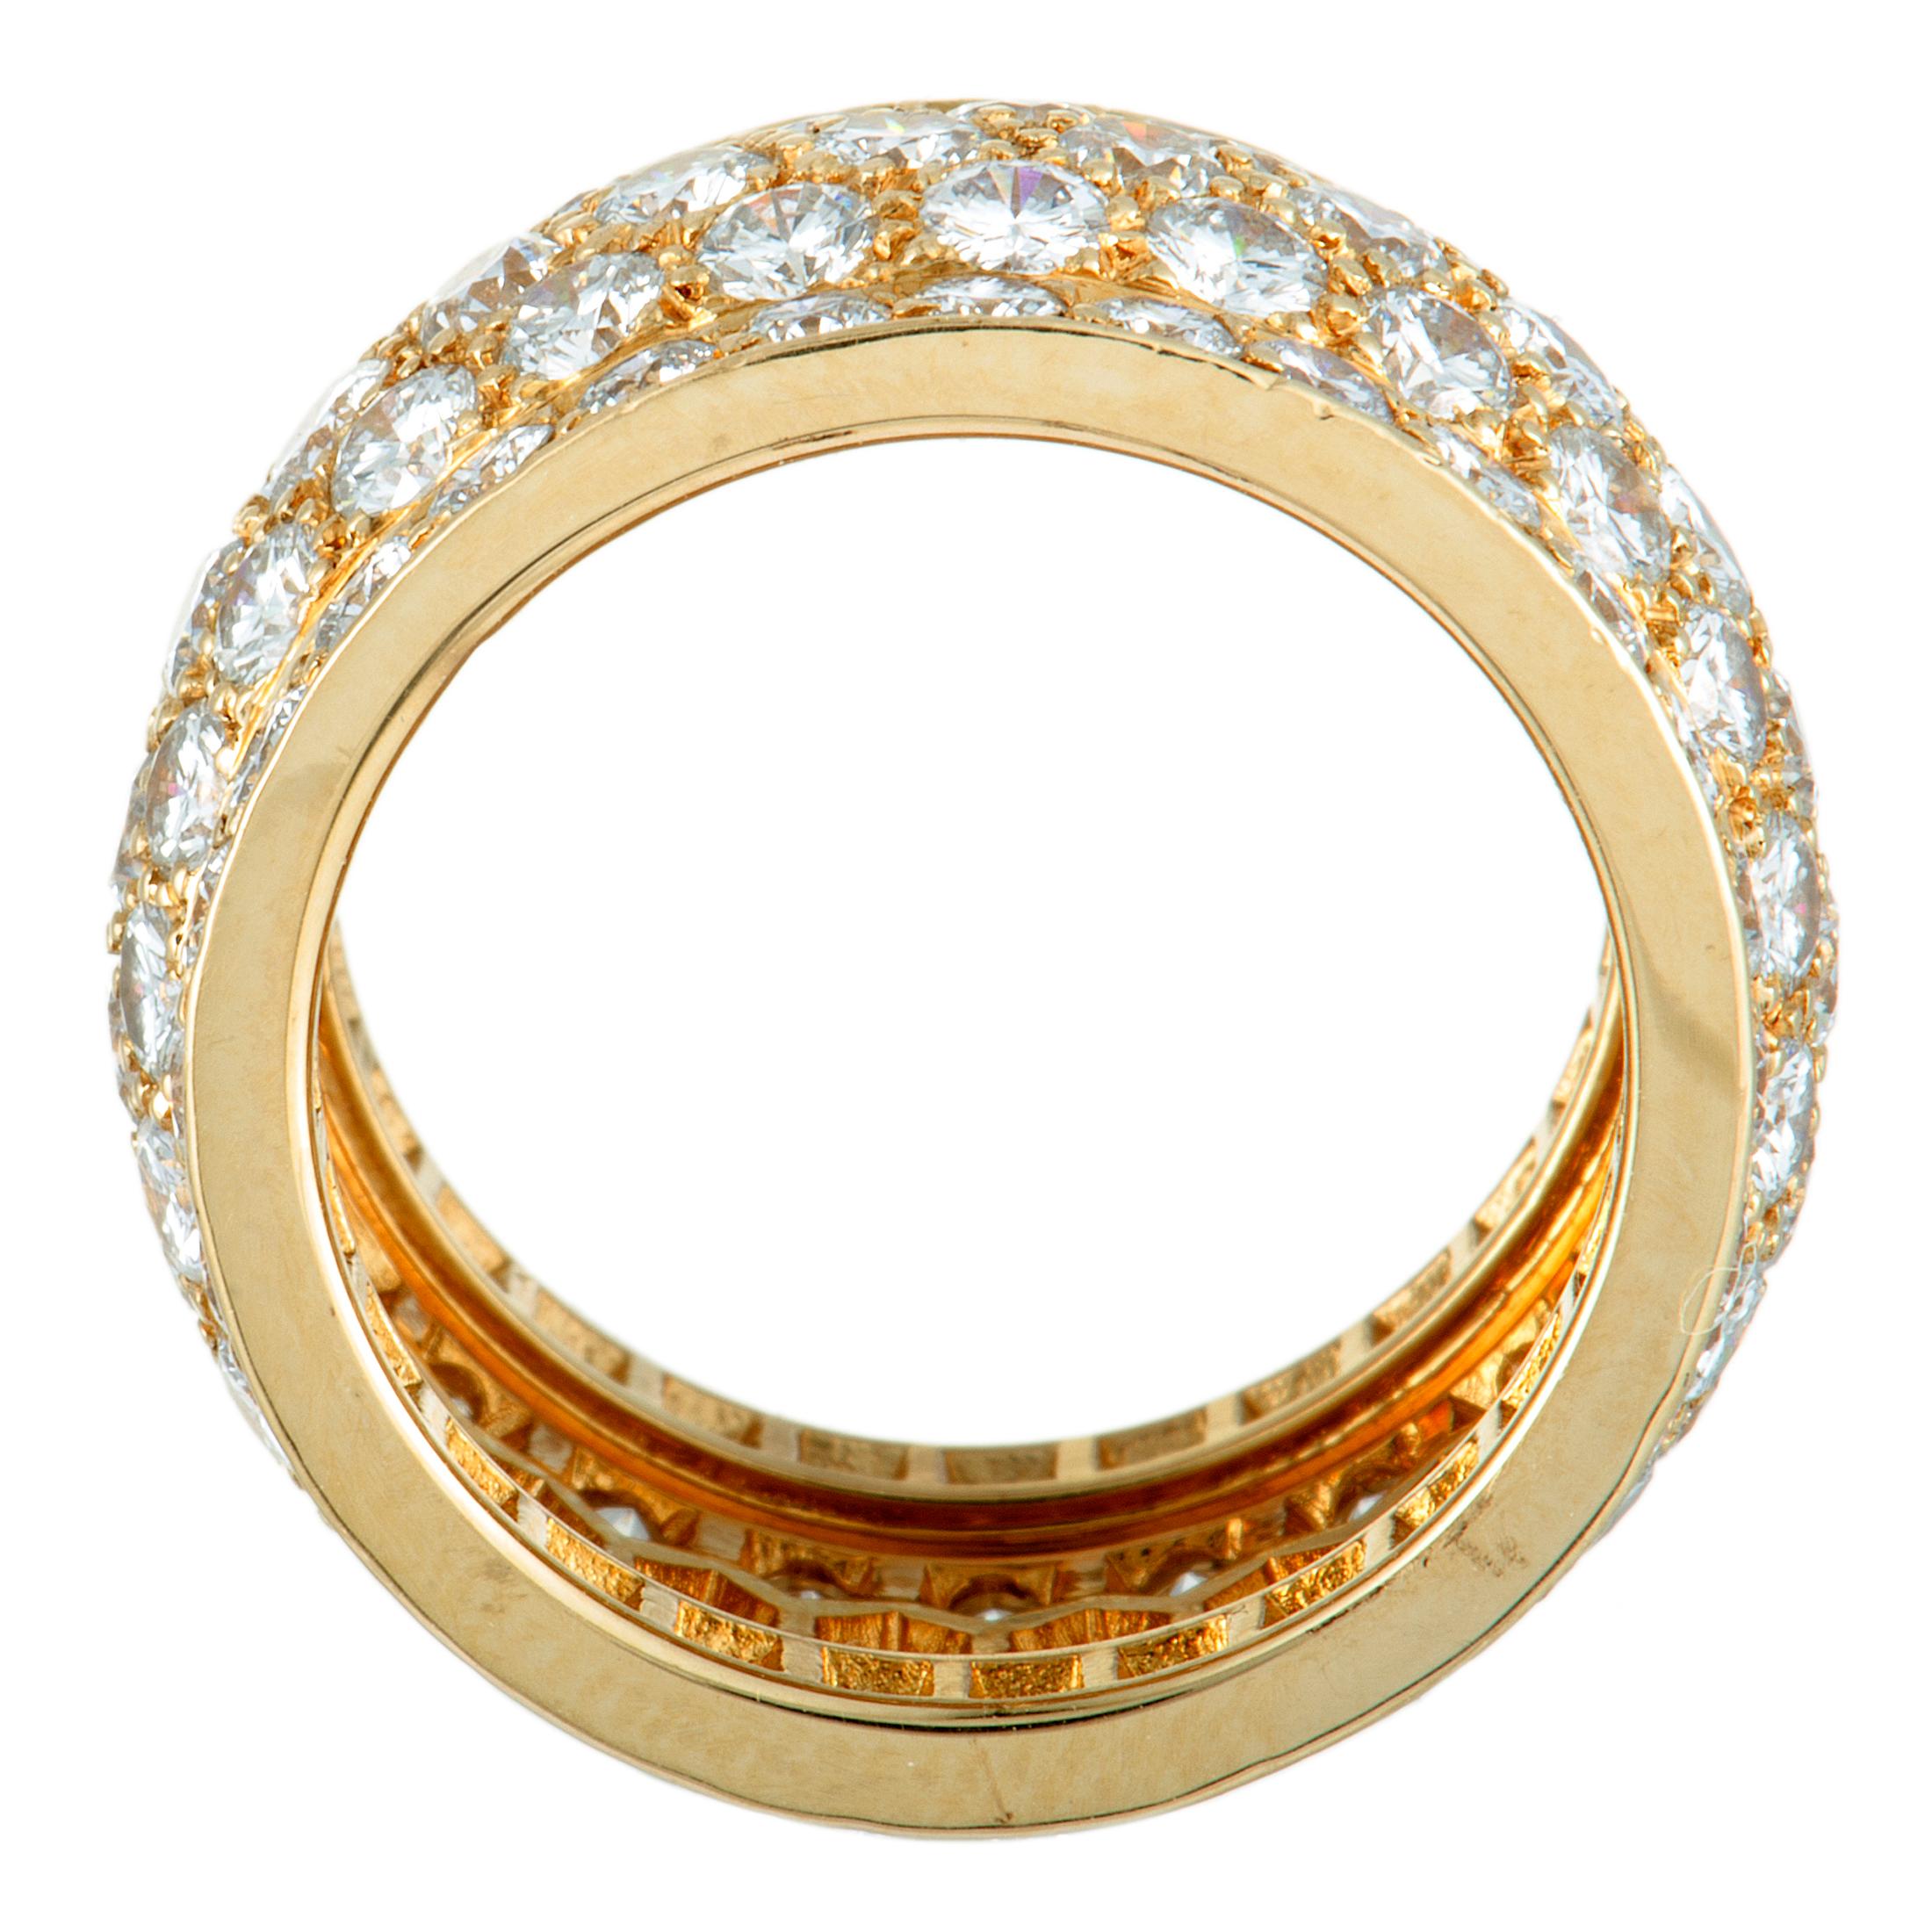 Created for the exquisite “Nigeria” collection, this extravagant Cartier ring is presented in luxurious 18K yellow gold and lavishly decorated with a plethora of resplendent diamonds. The diamonds boast grade F color and VVS clarity and amount to